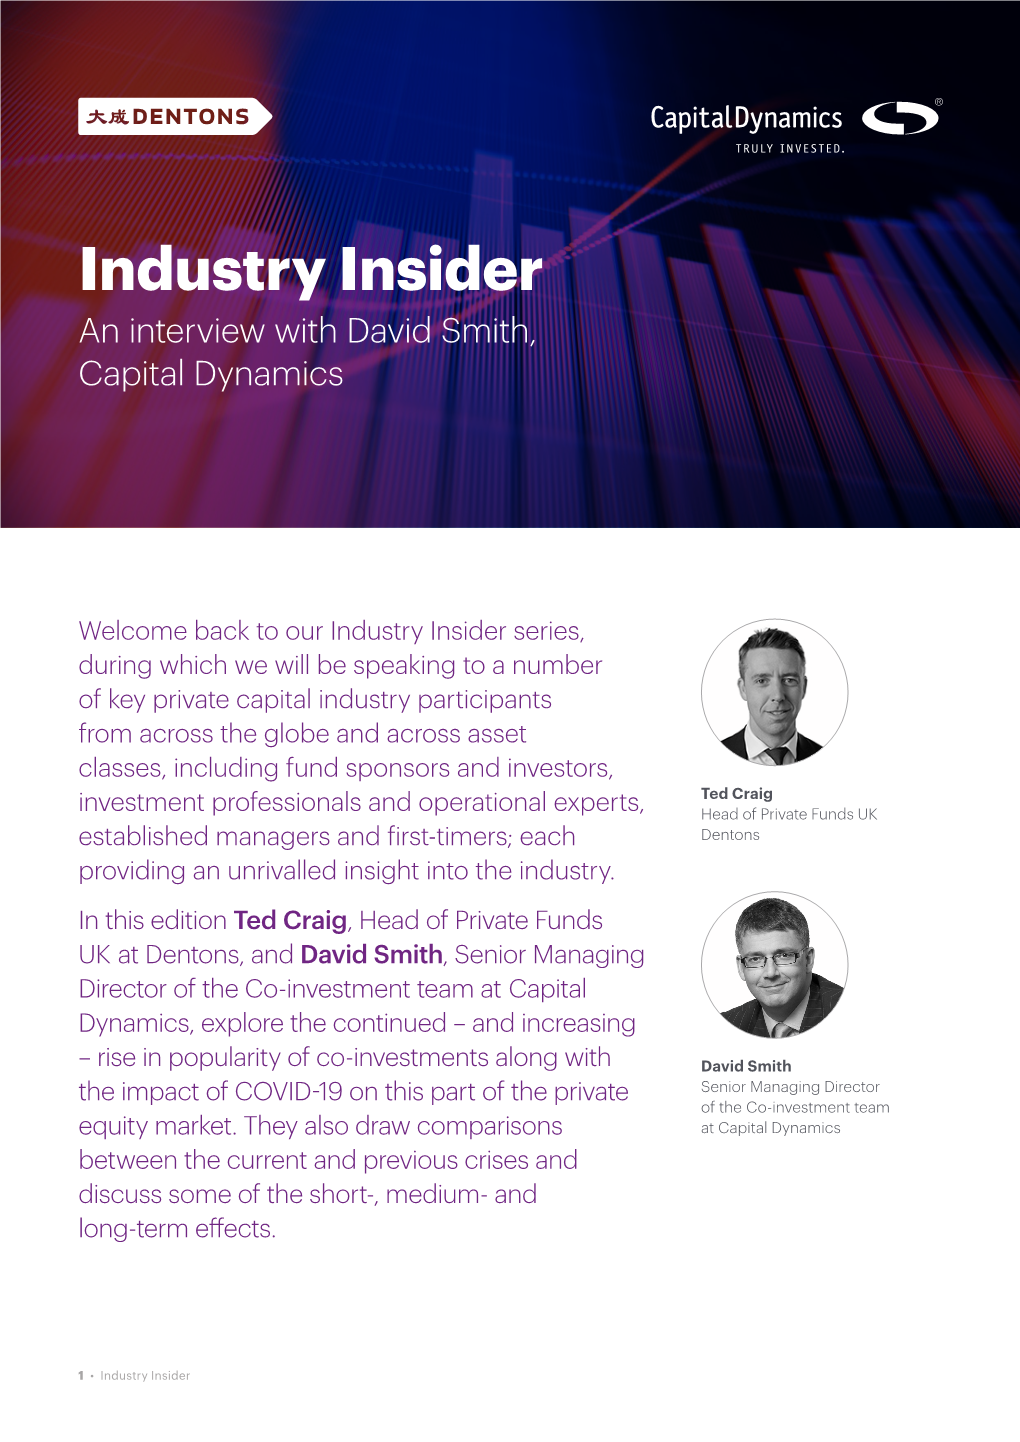 Industry Insider an Interview with David Smith, Capital Dynamics